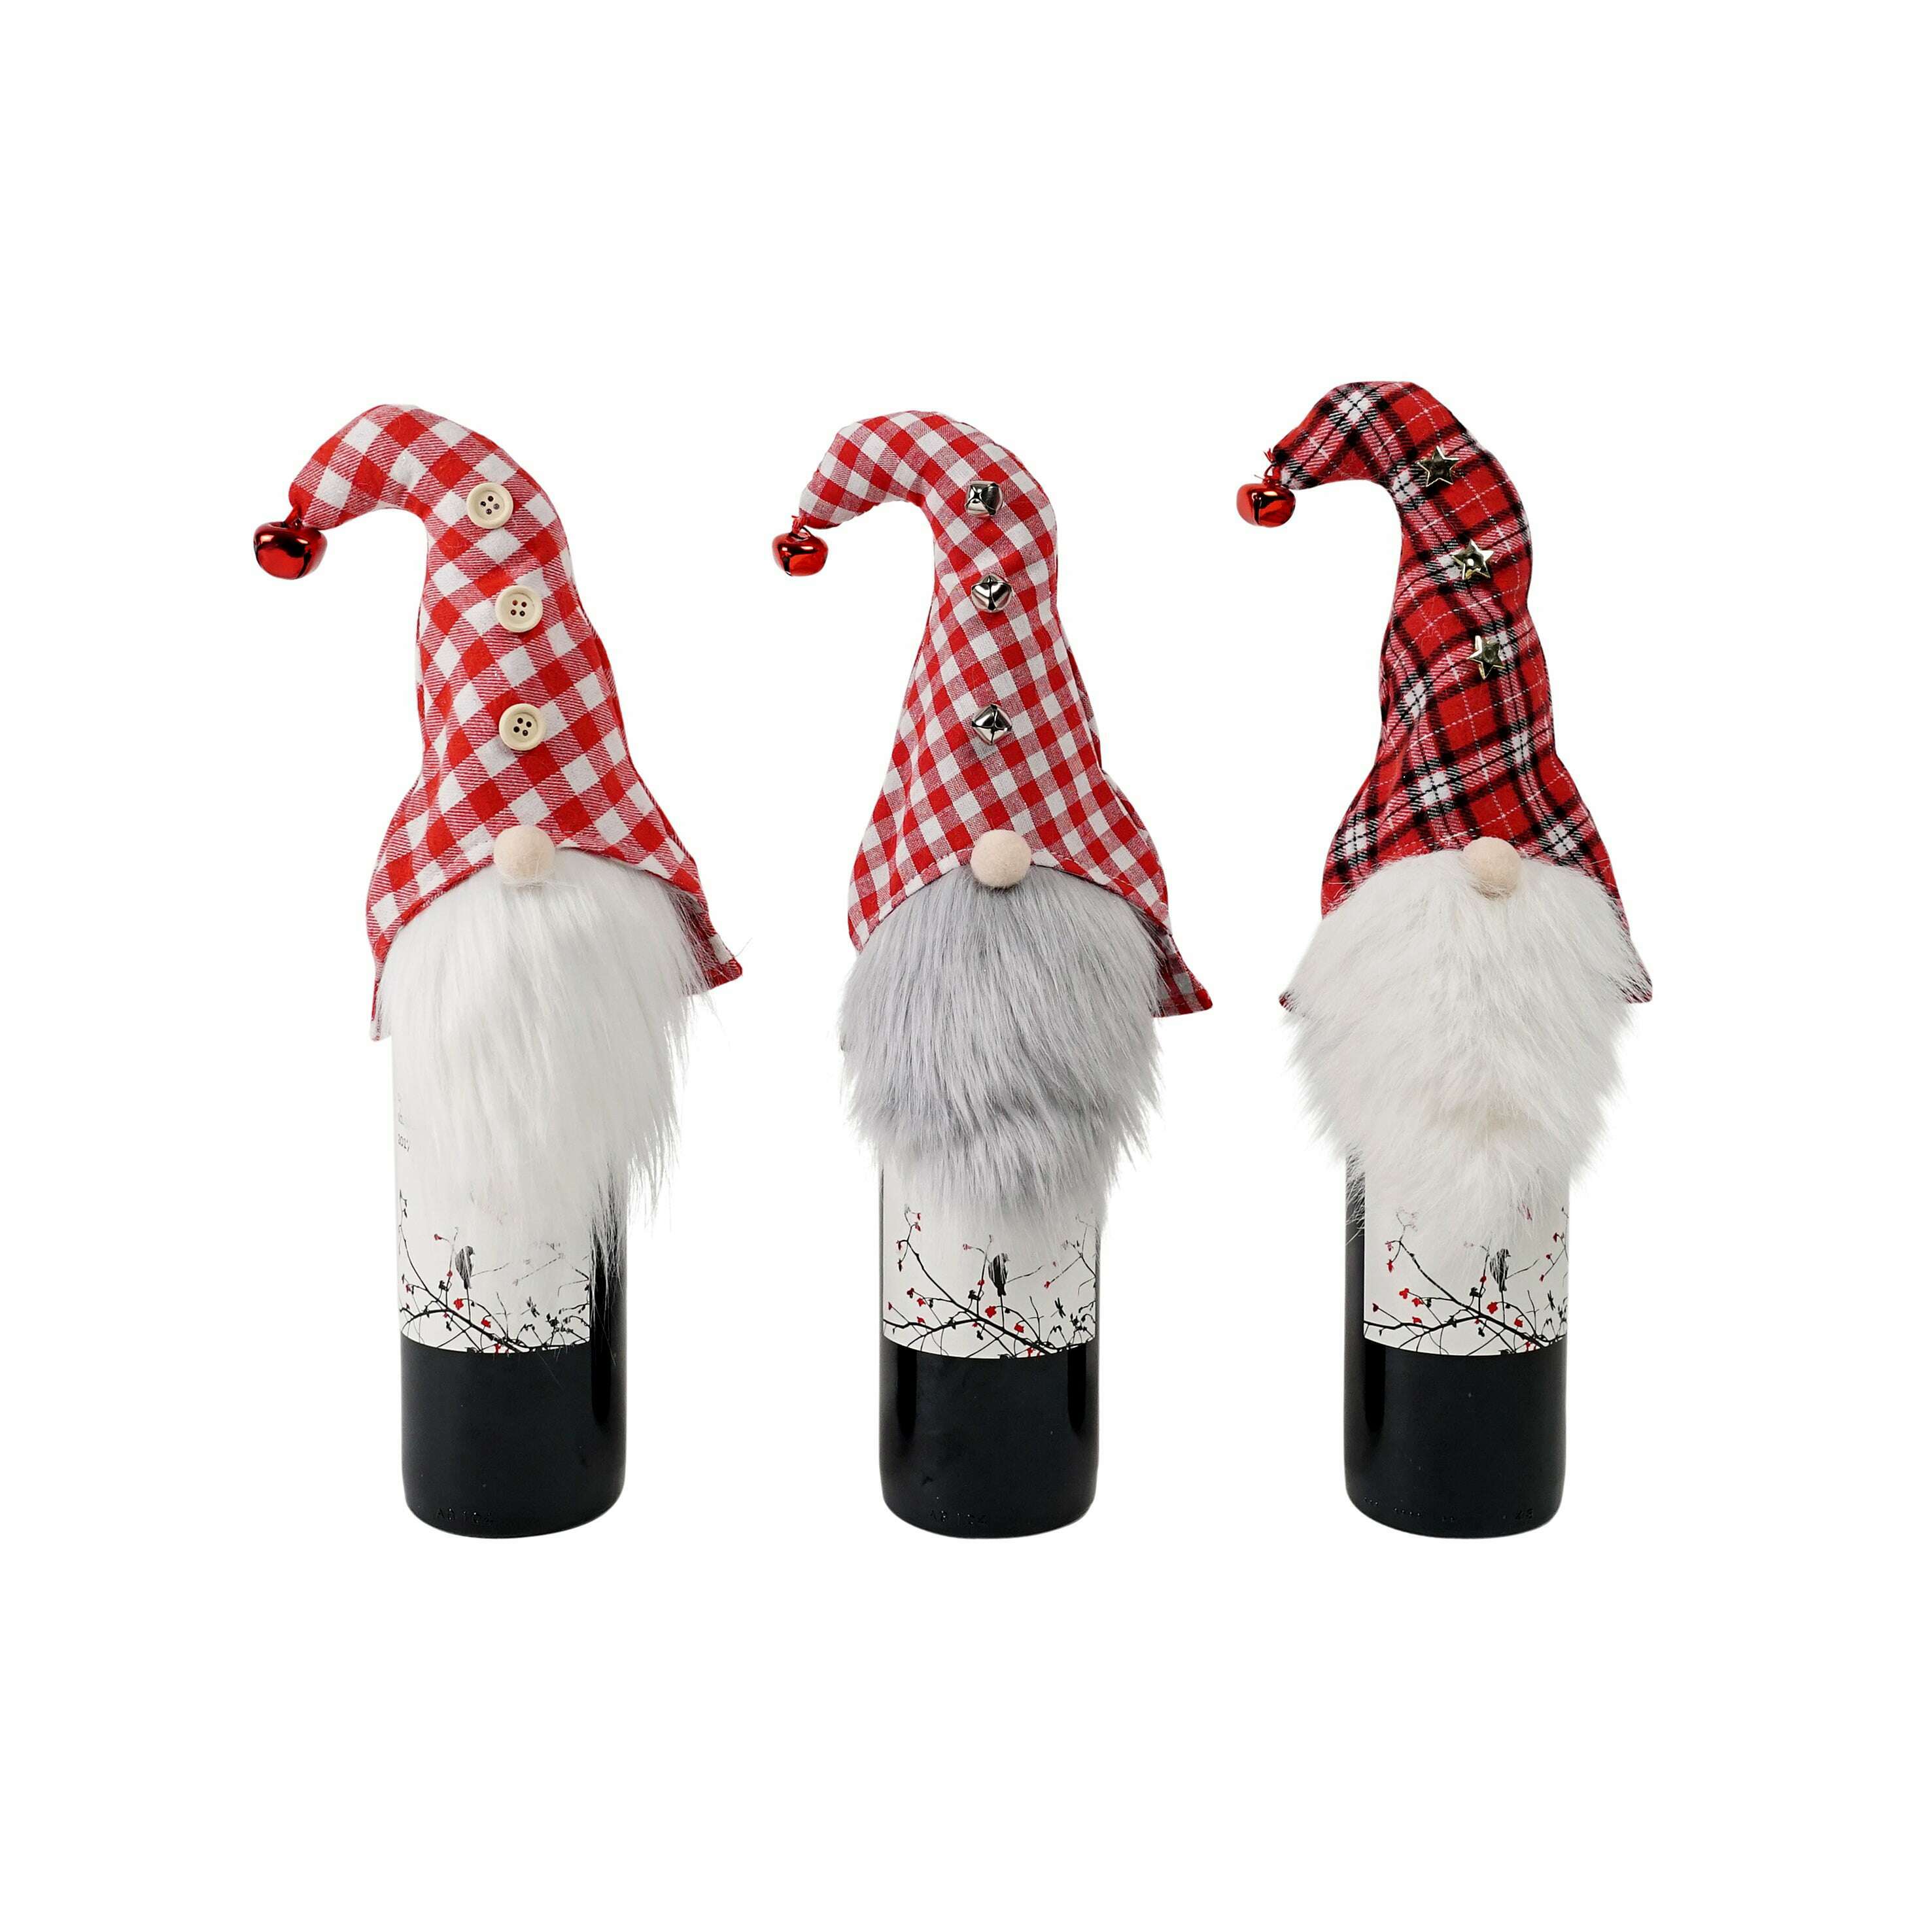 Impodimo Living & Giving:Santa Hat Bottle Covers:Swing Gifts